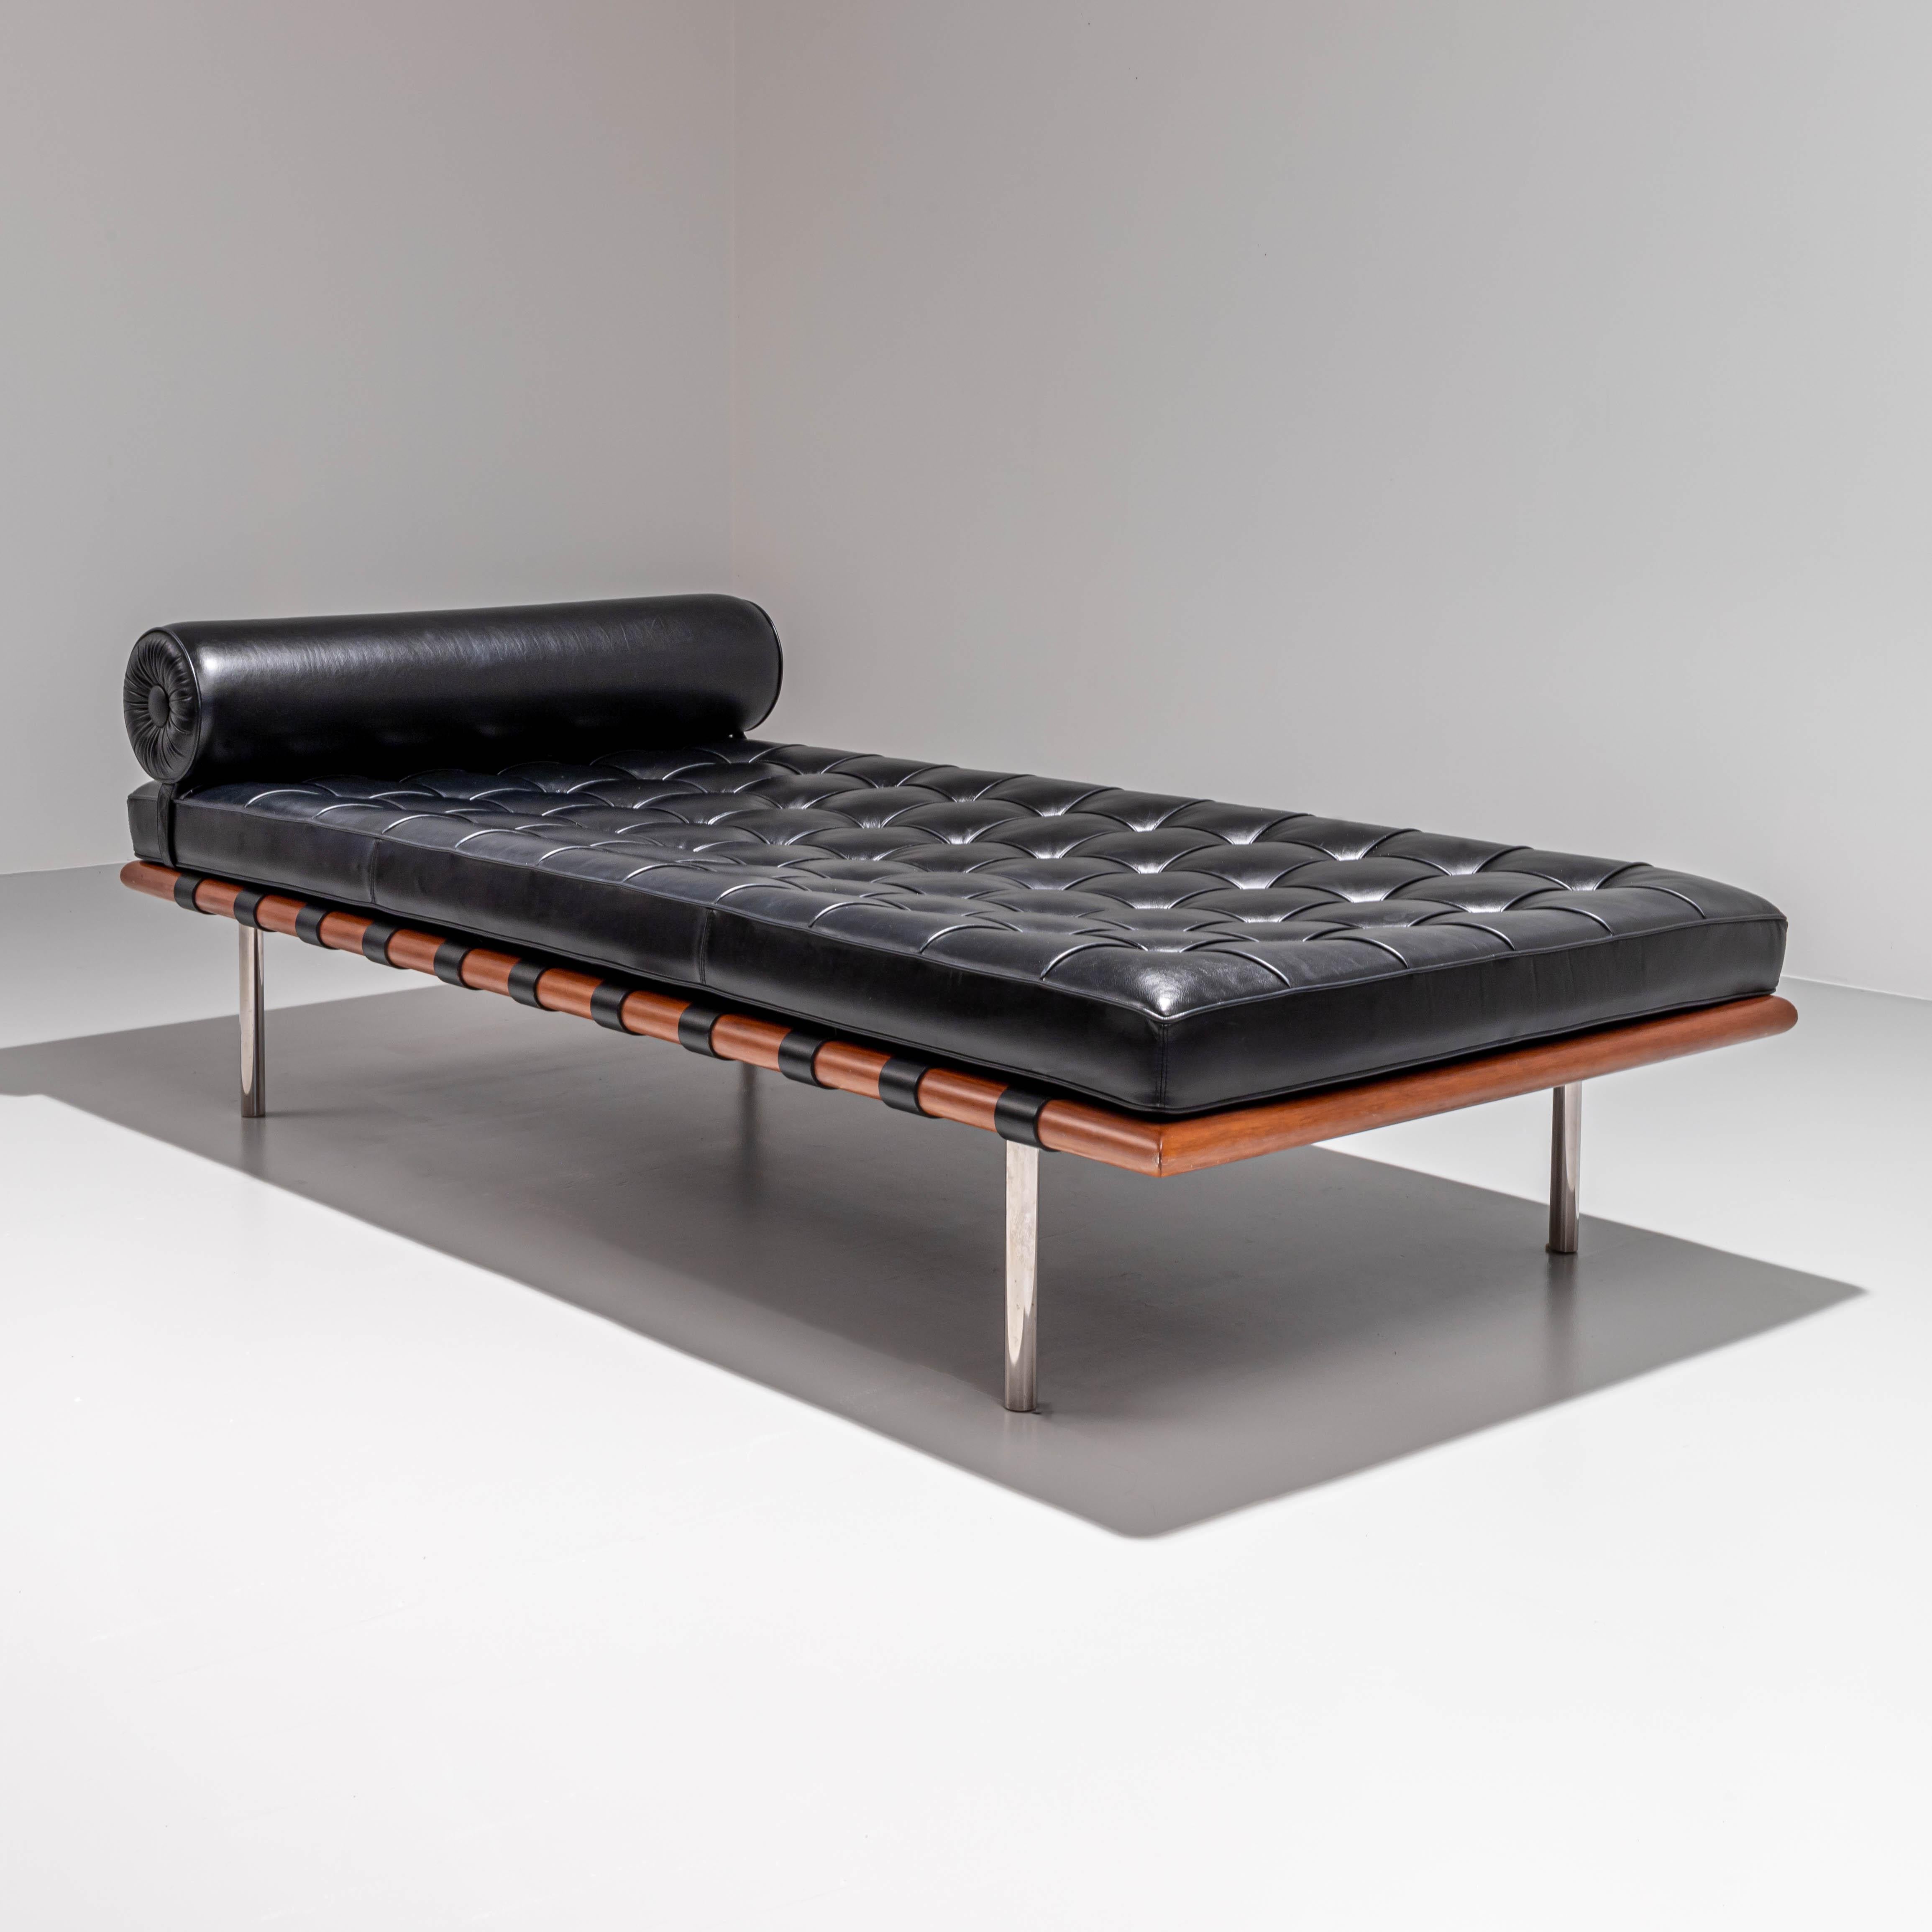 The Knoll Studio Barcelona Daybed is an iconic design by Ludwig Mies van der Rohe. In 1929 Ludwig Mies van der Rohe was asked to design the German Pavilion for the World Exhibition in Barcelona. He created a beautiful whole in which the Barcelona